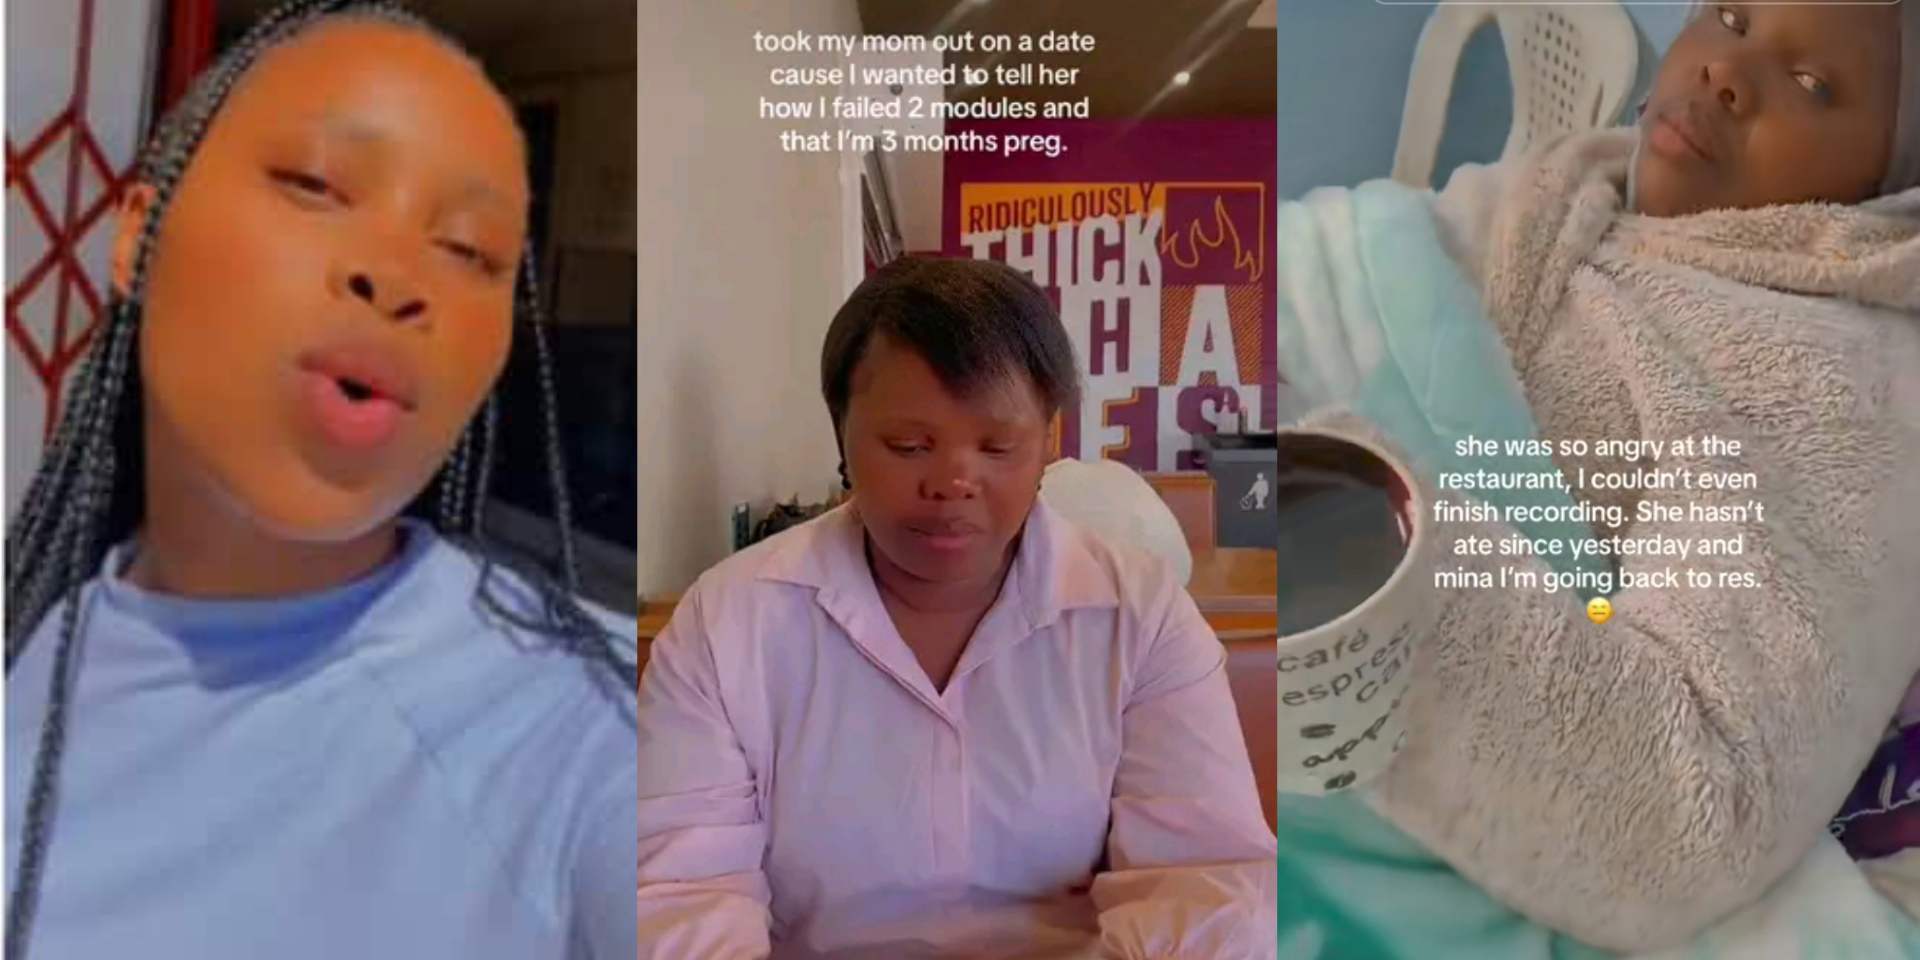 Lady takes mom on a date, breaks news of pregnancy and failed university [Video]